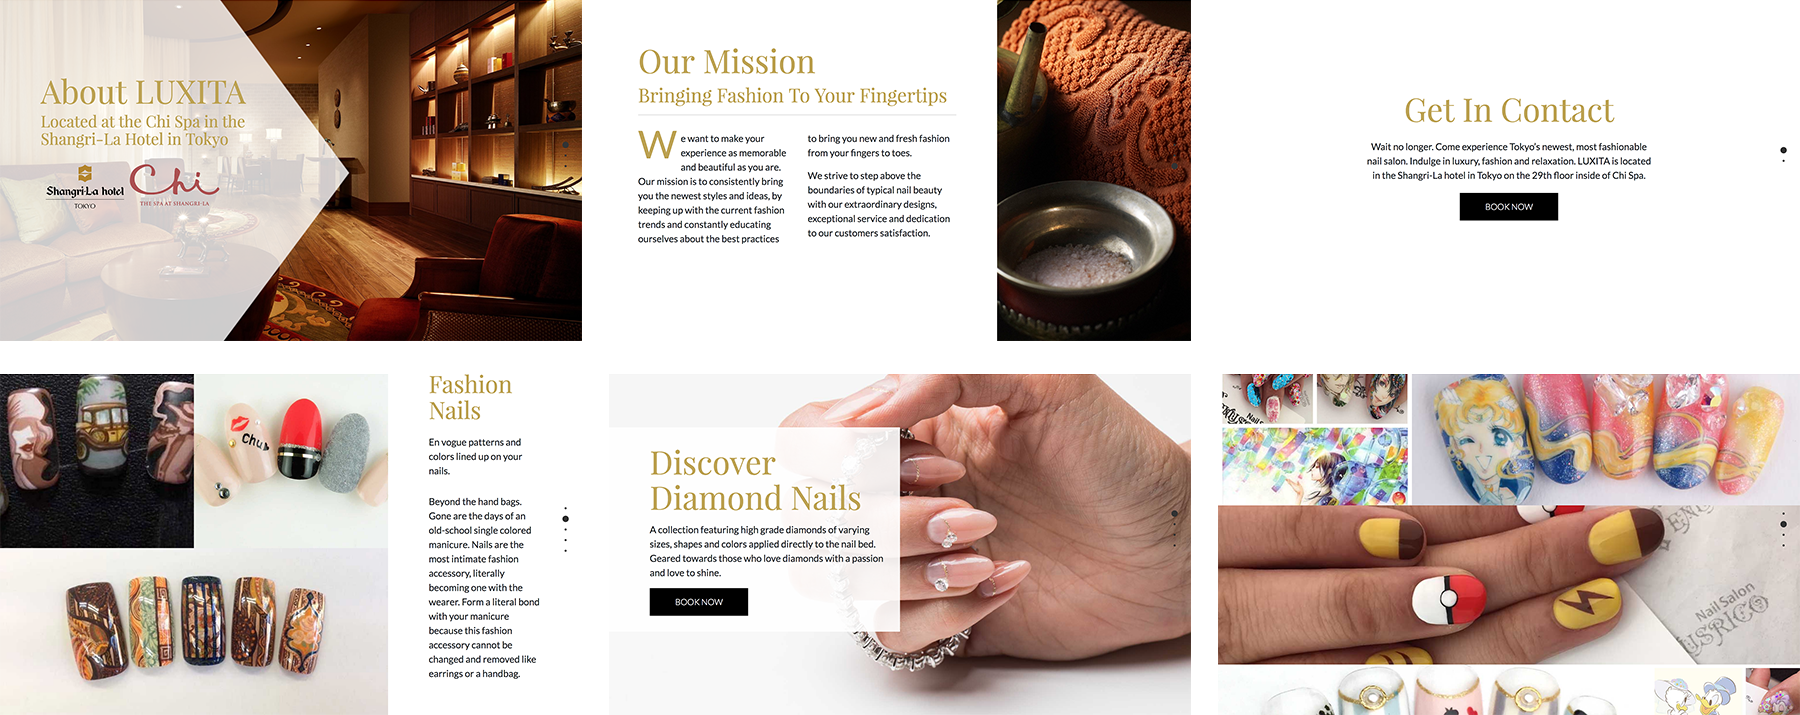 About and contact pages from the English LUXITA salon website. By Katherine Delorme.